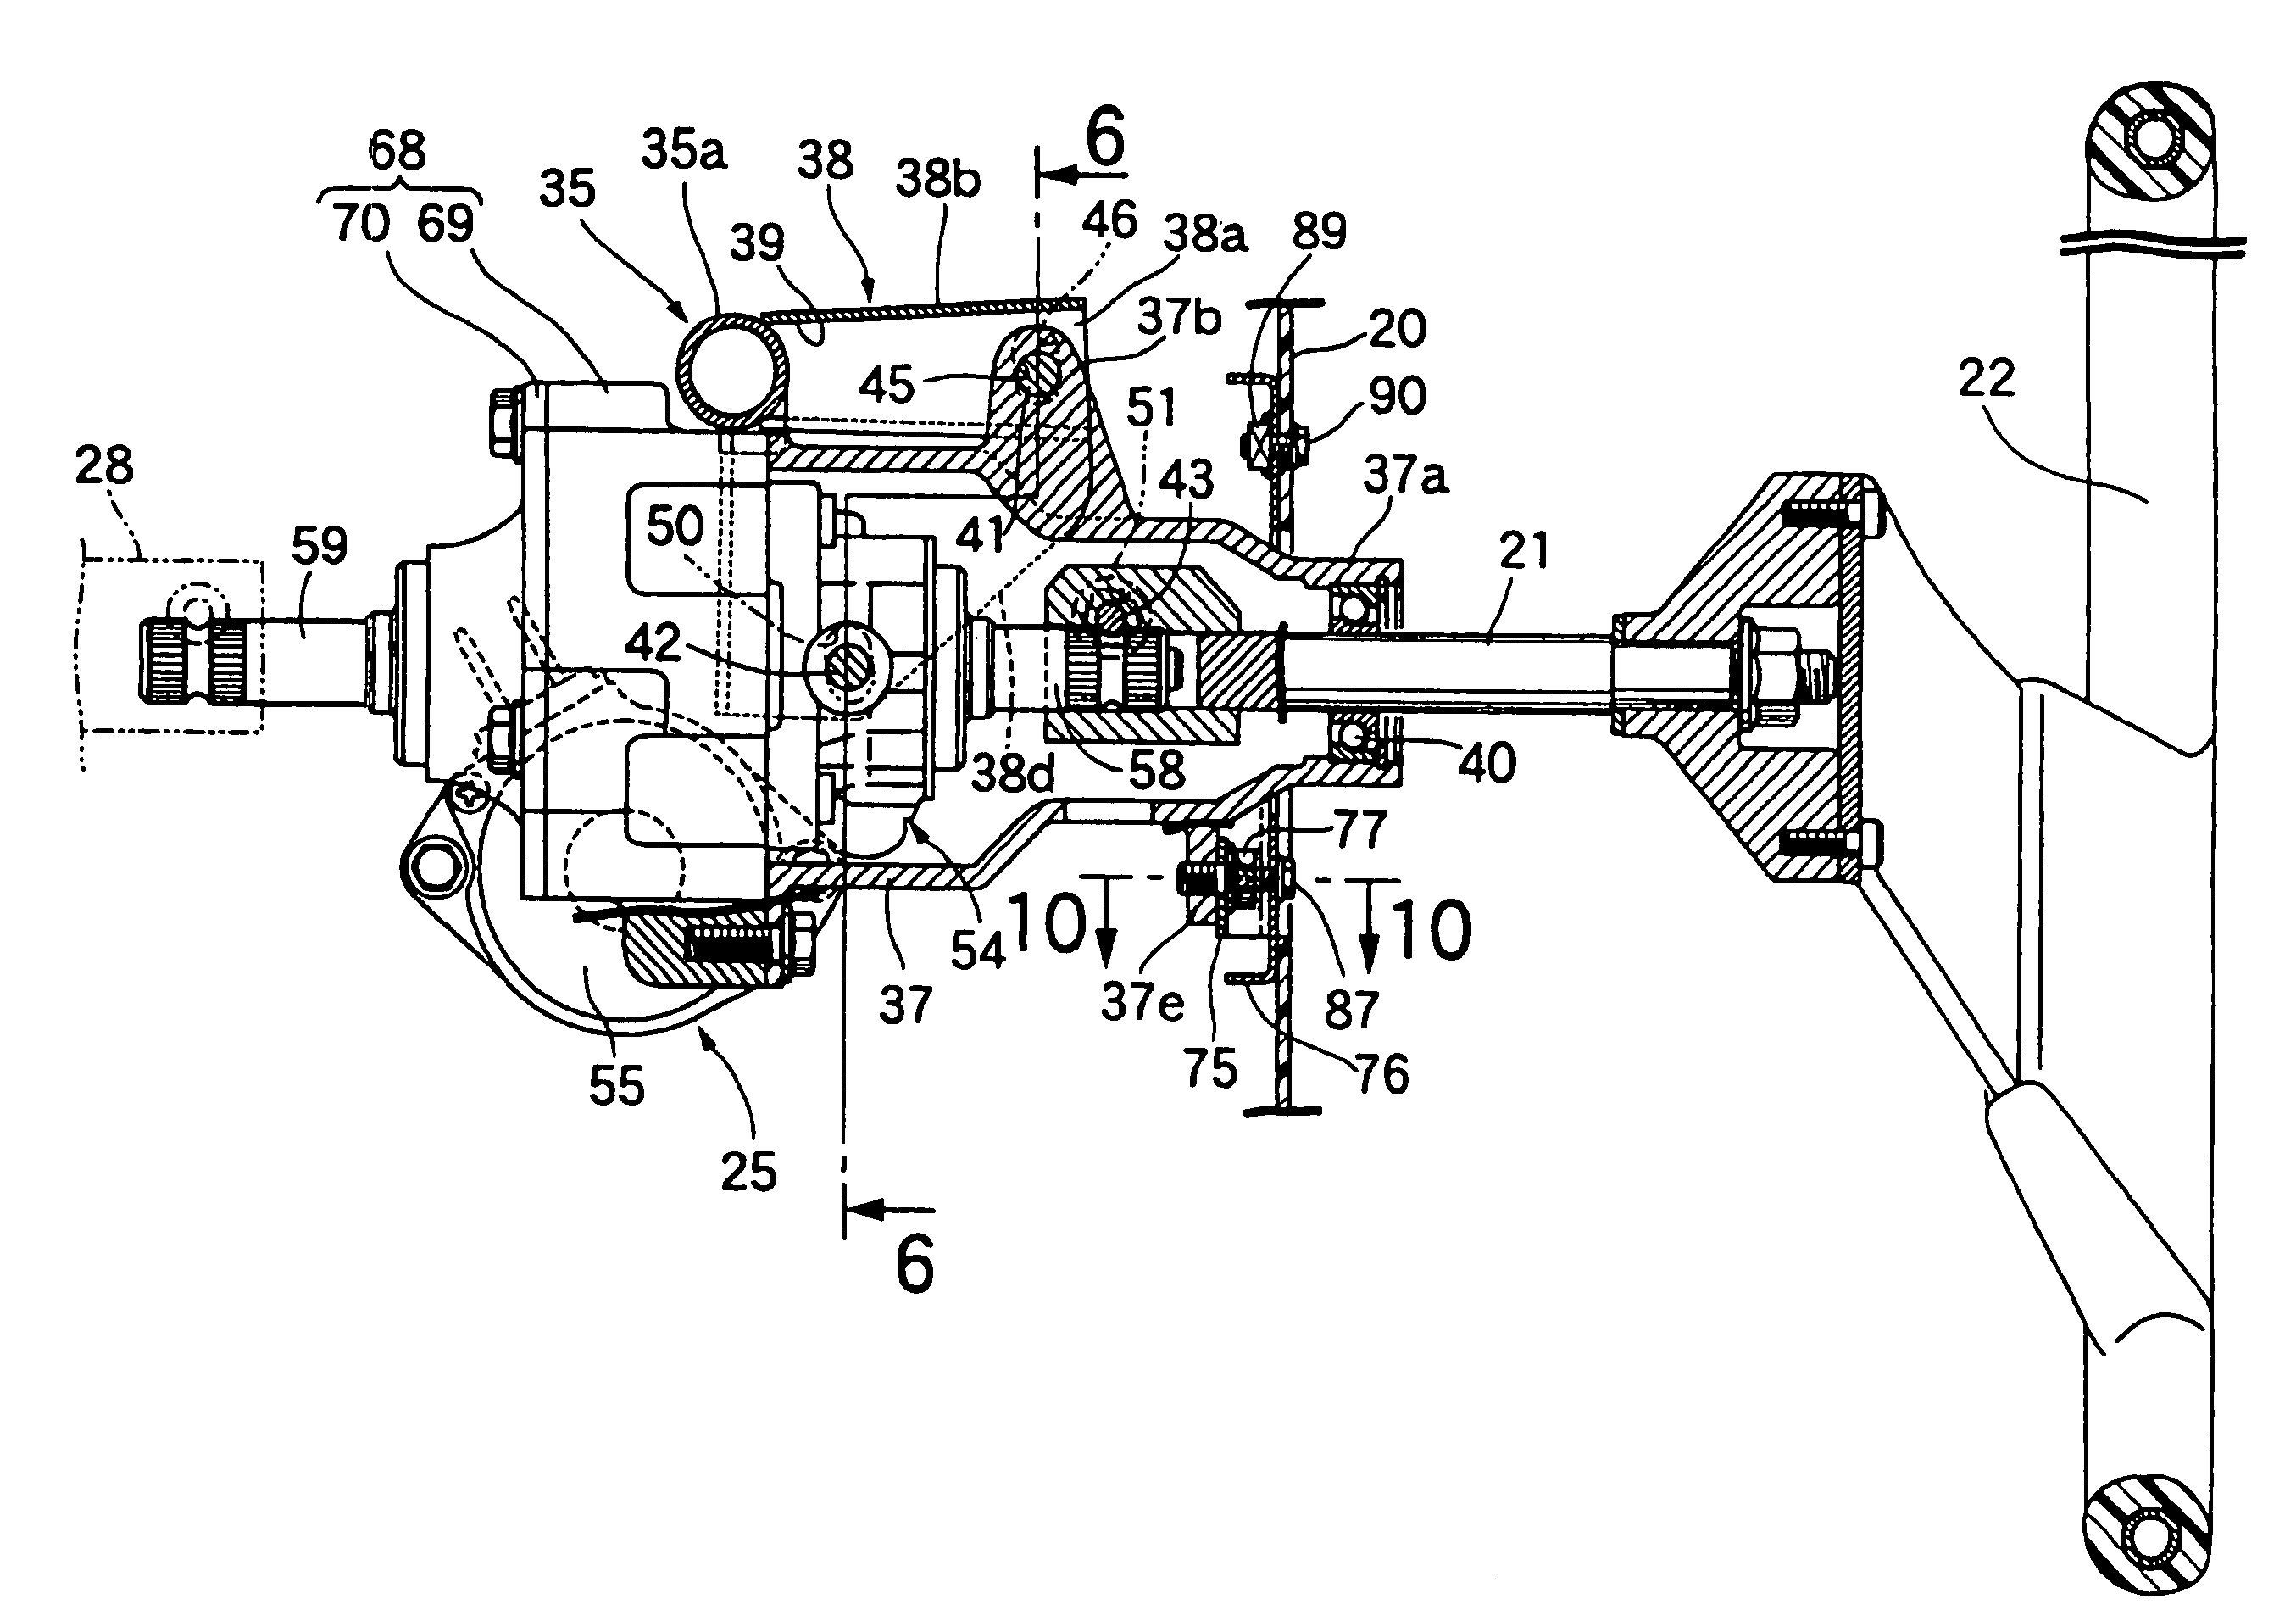 Power steering system for vehicle